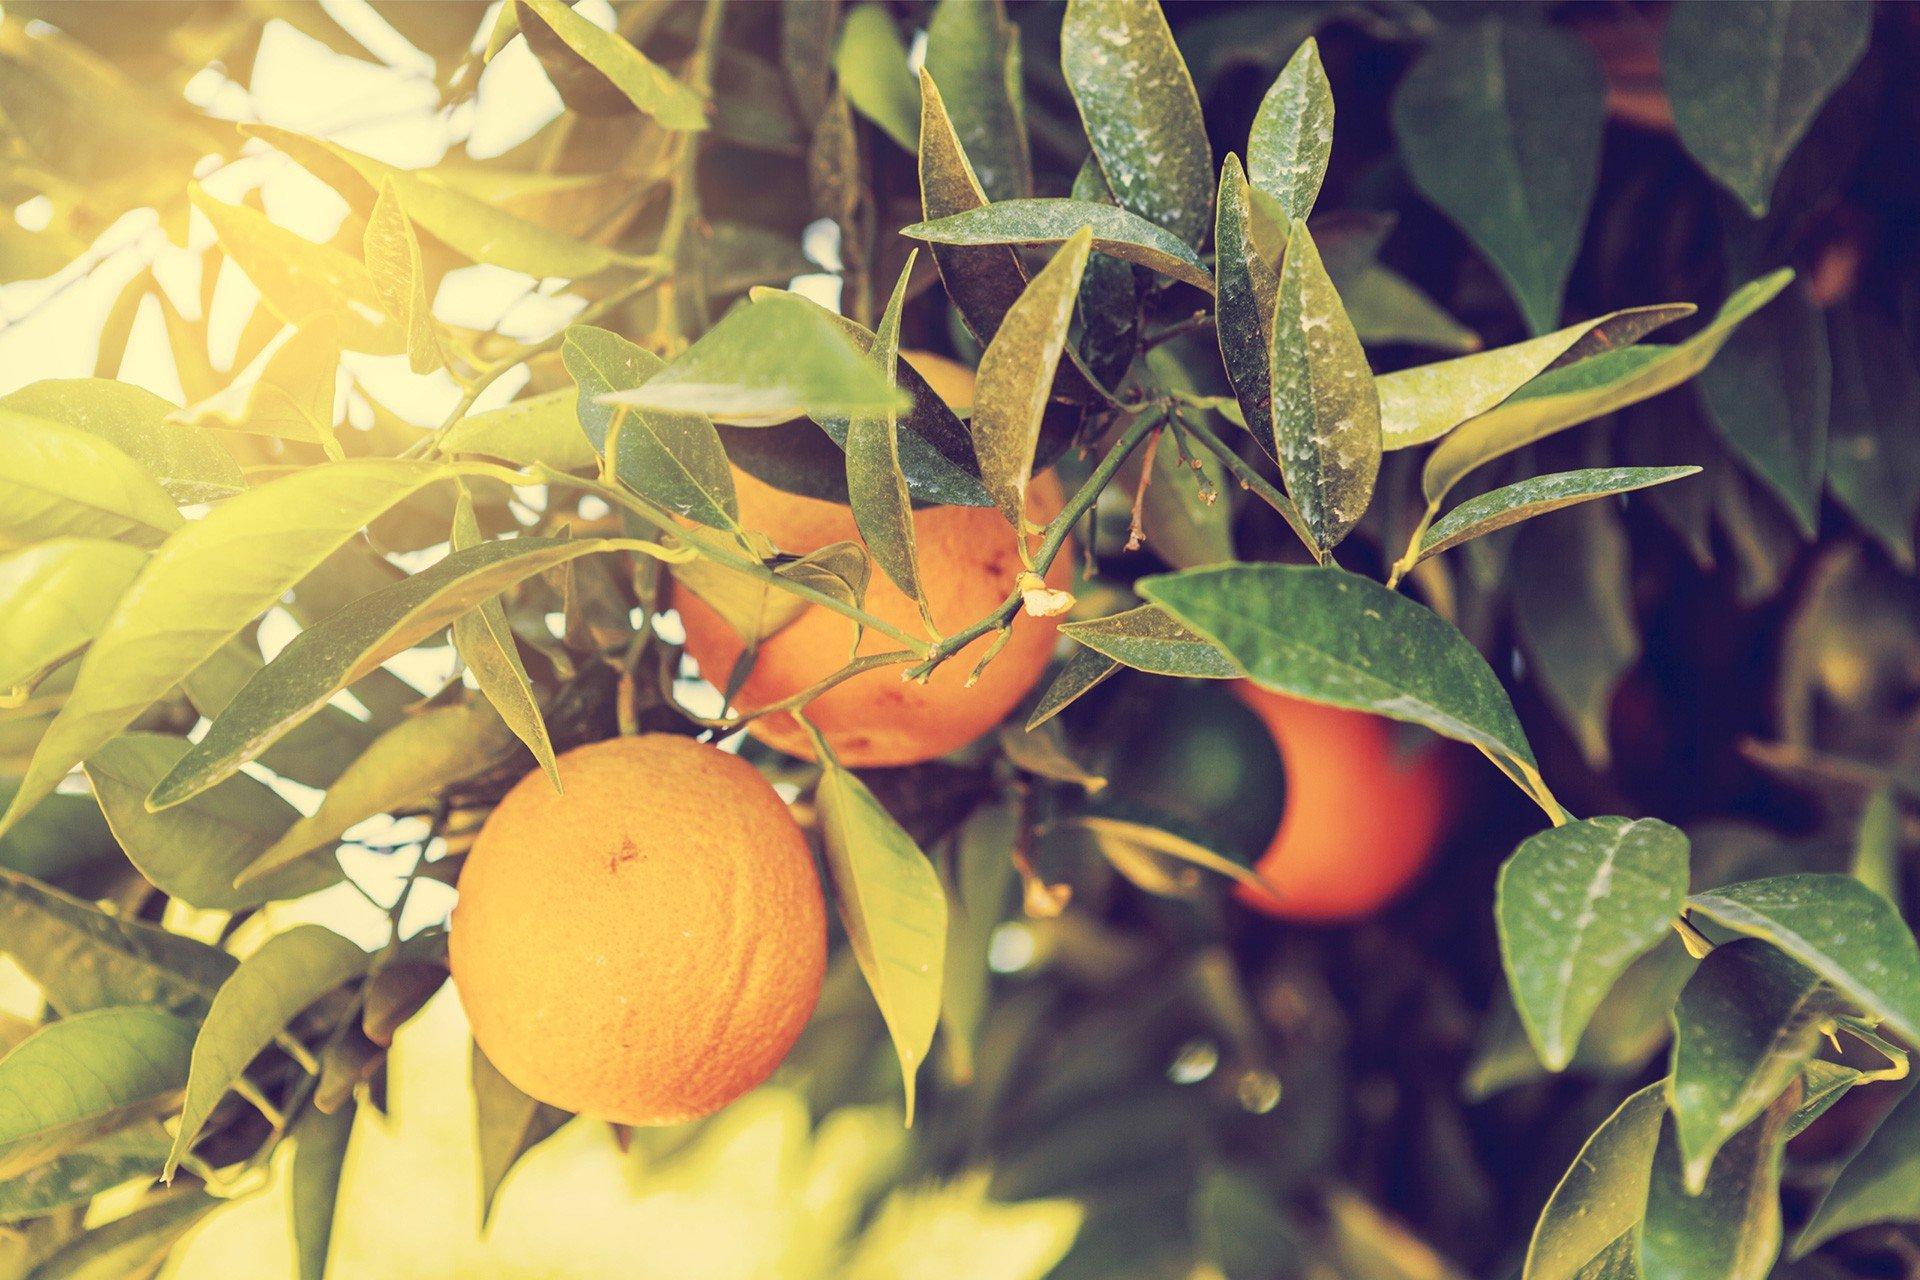 Citrus fruit growing in a tree